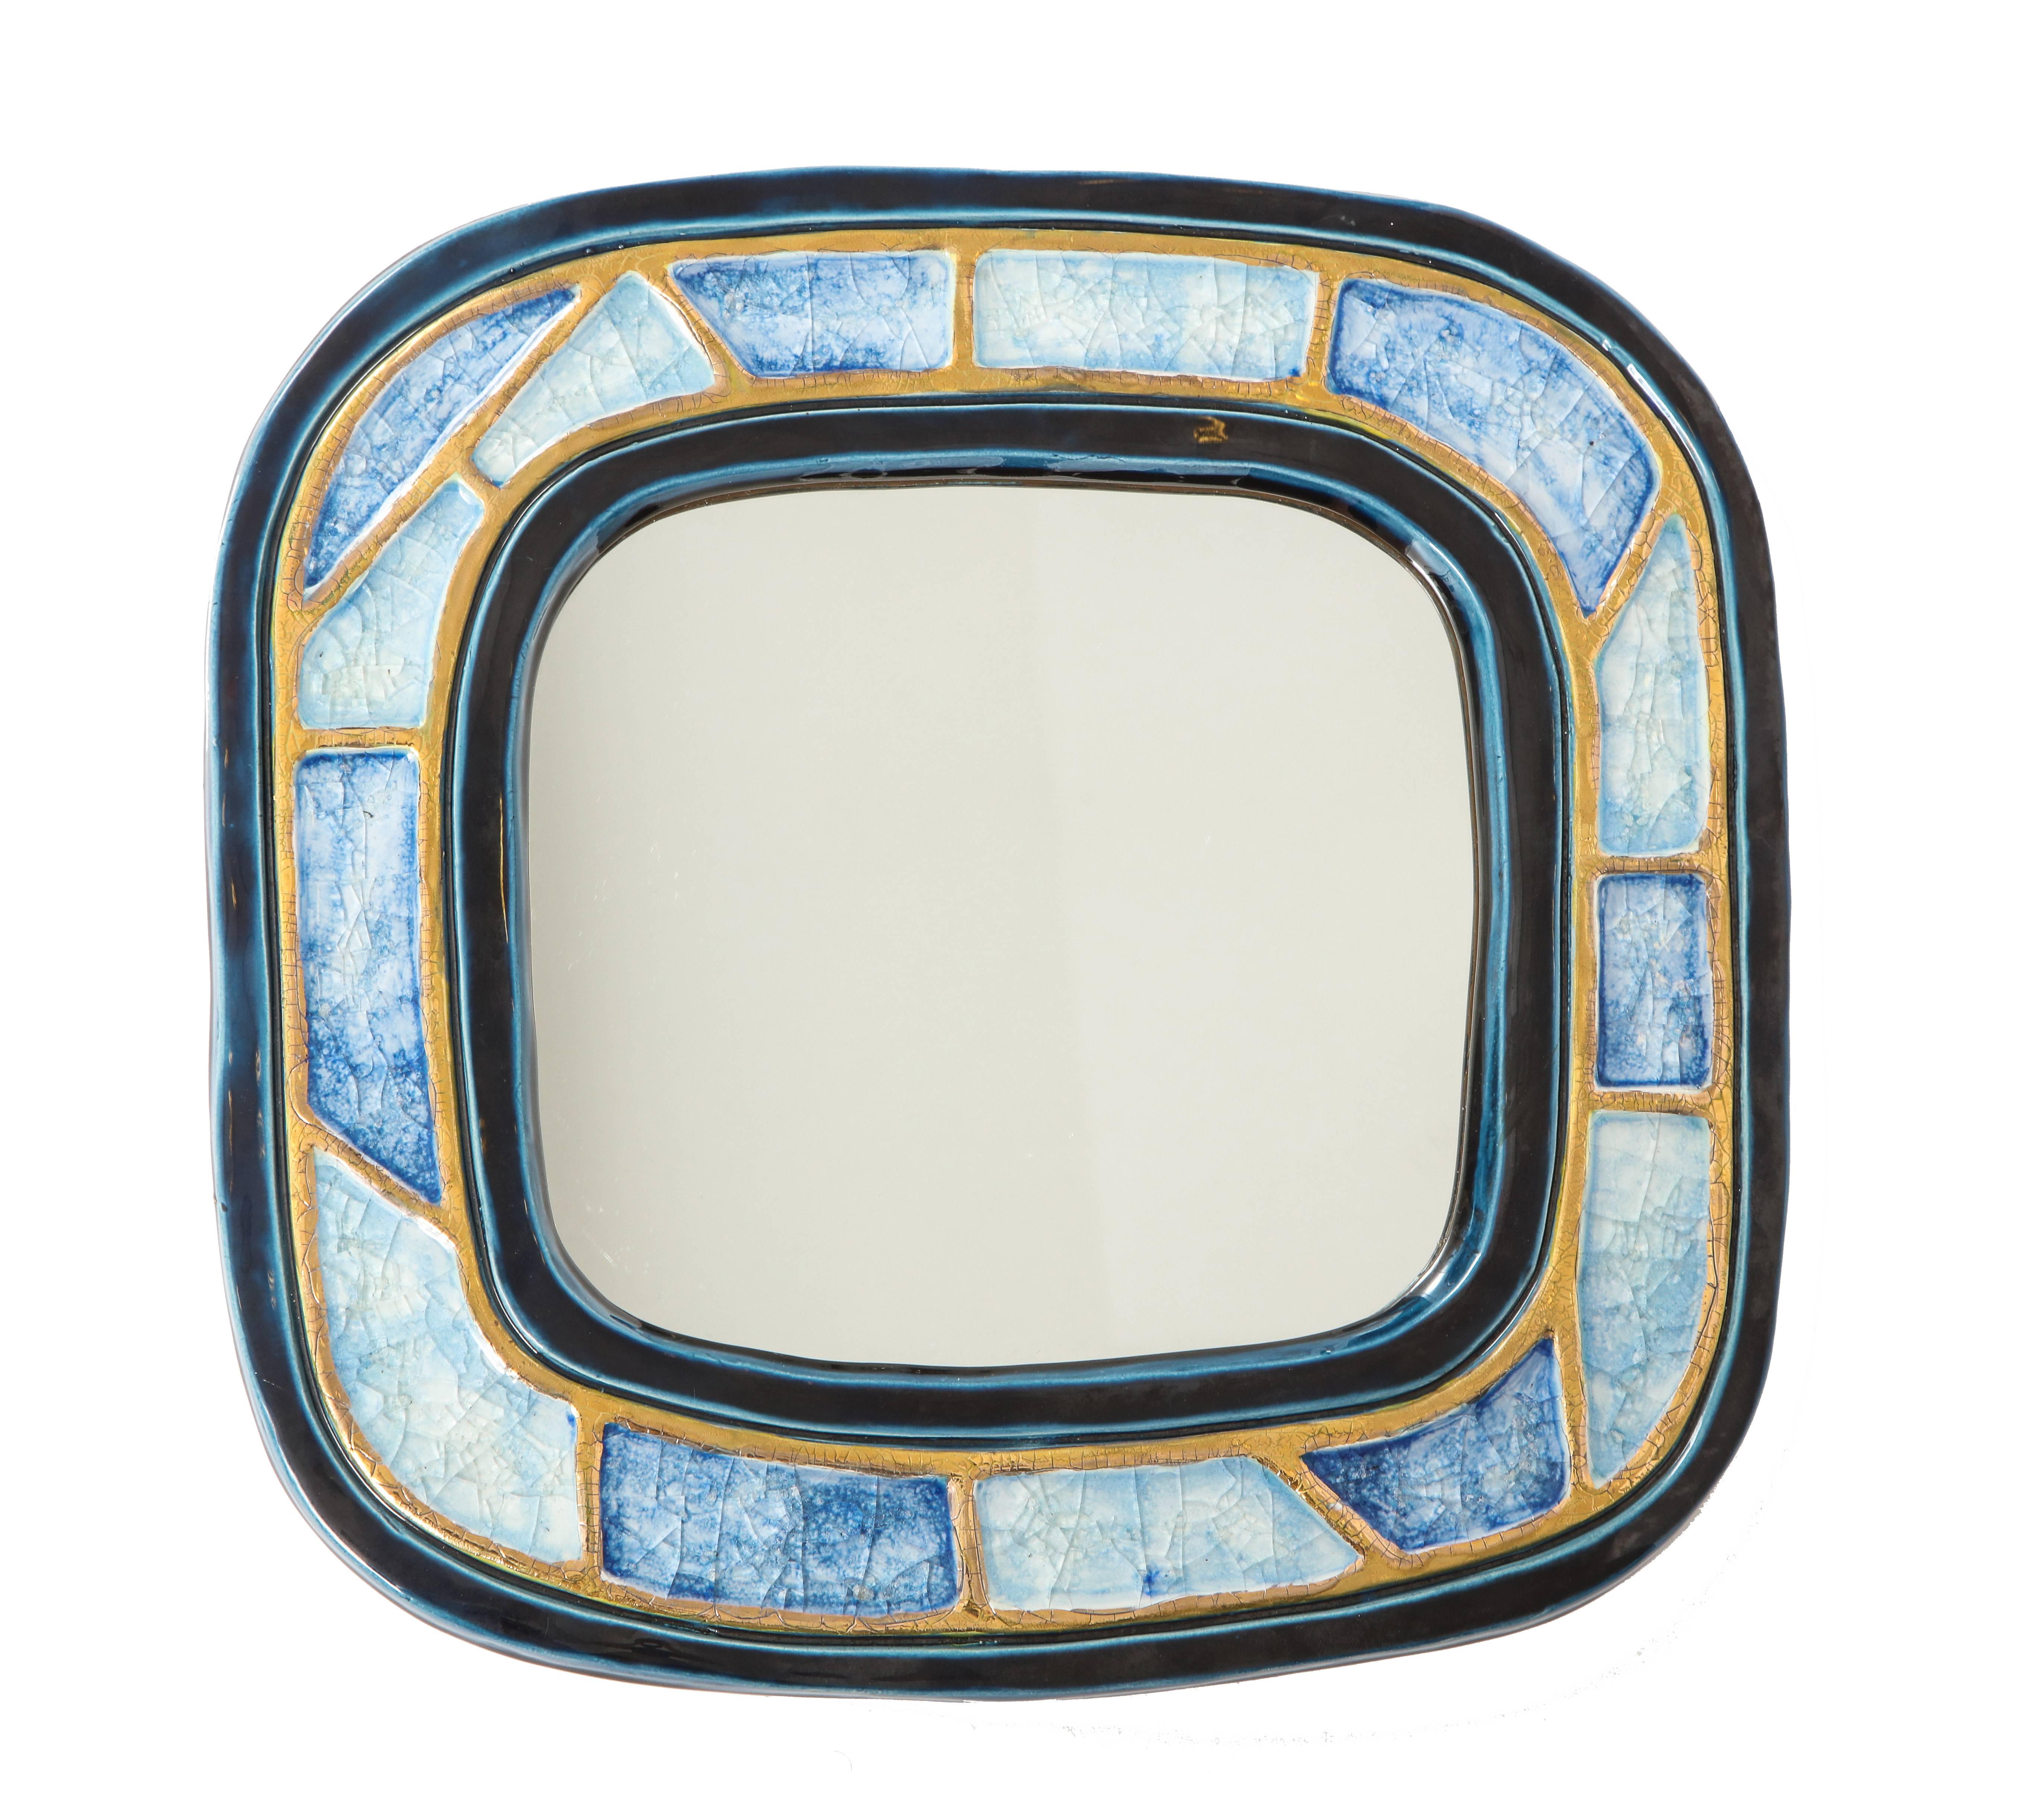 Mithé Espelt mirror, ceramic, gold and blue, fused glass. Small scale rounded square mirror decorated with two tones of blue fused glass framed by a crackle gold glaze. Felt covered back.
